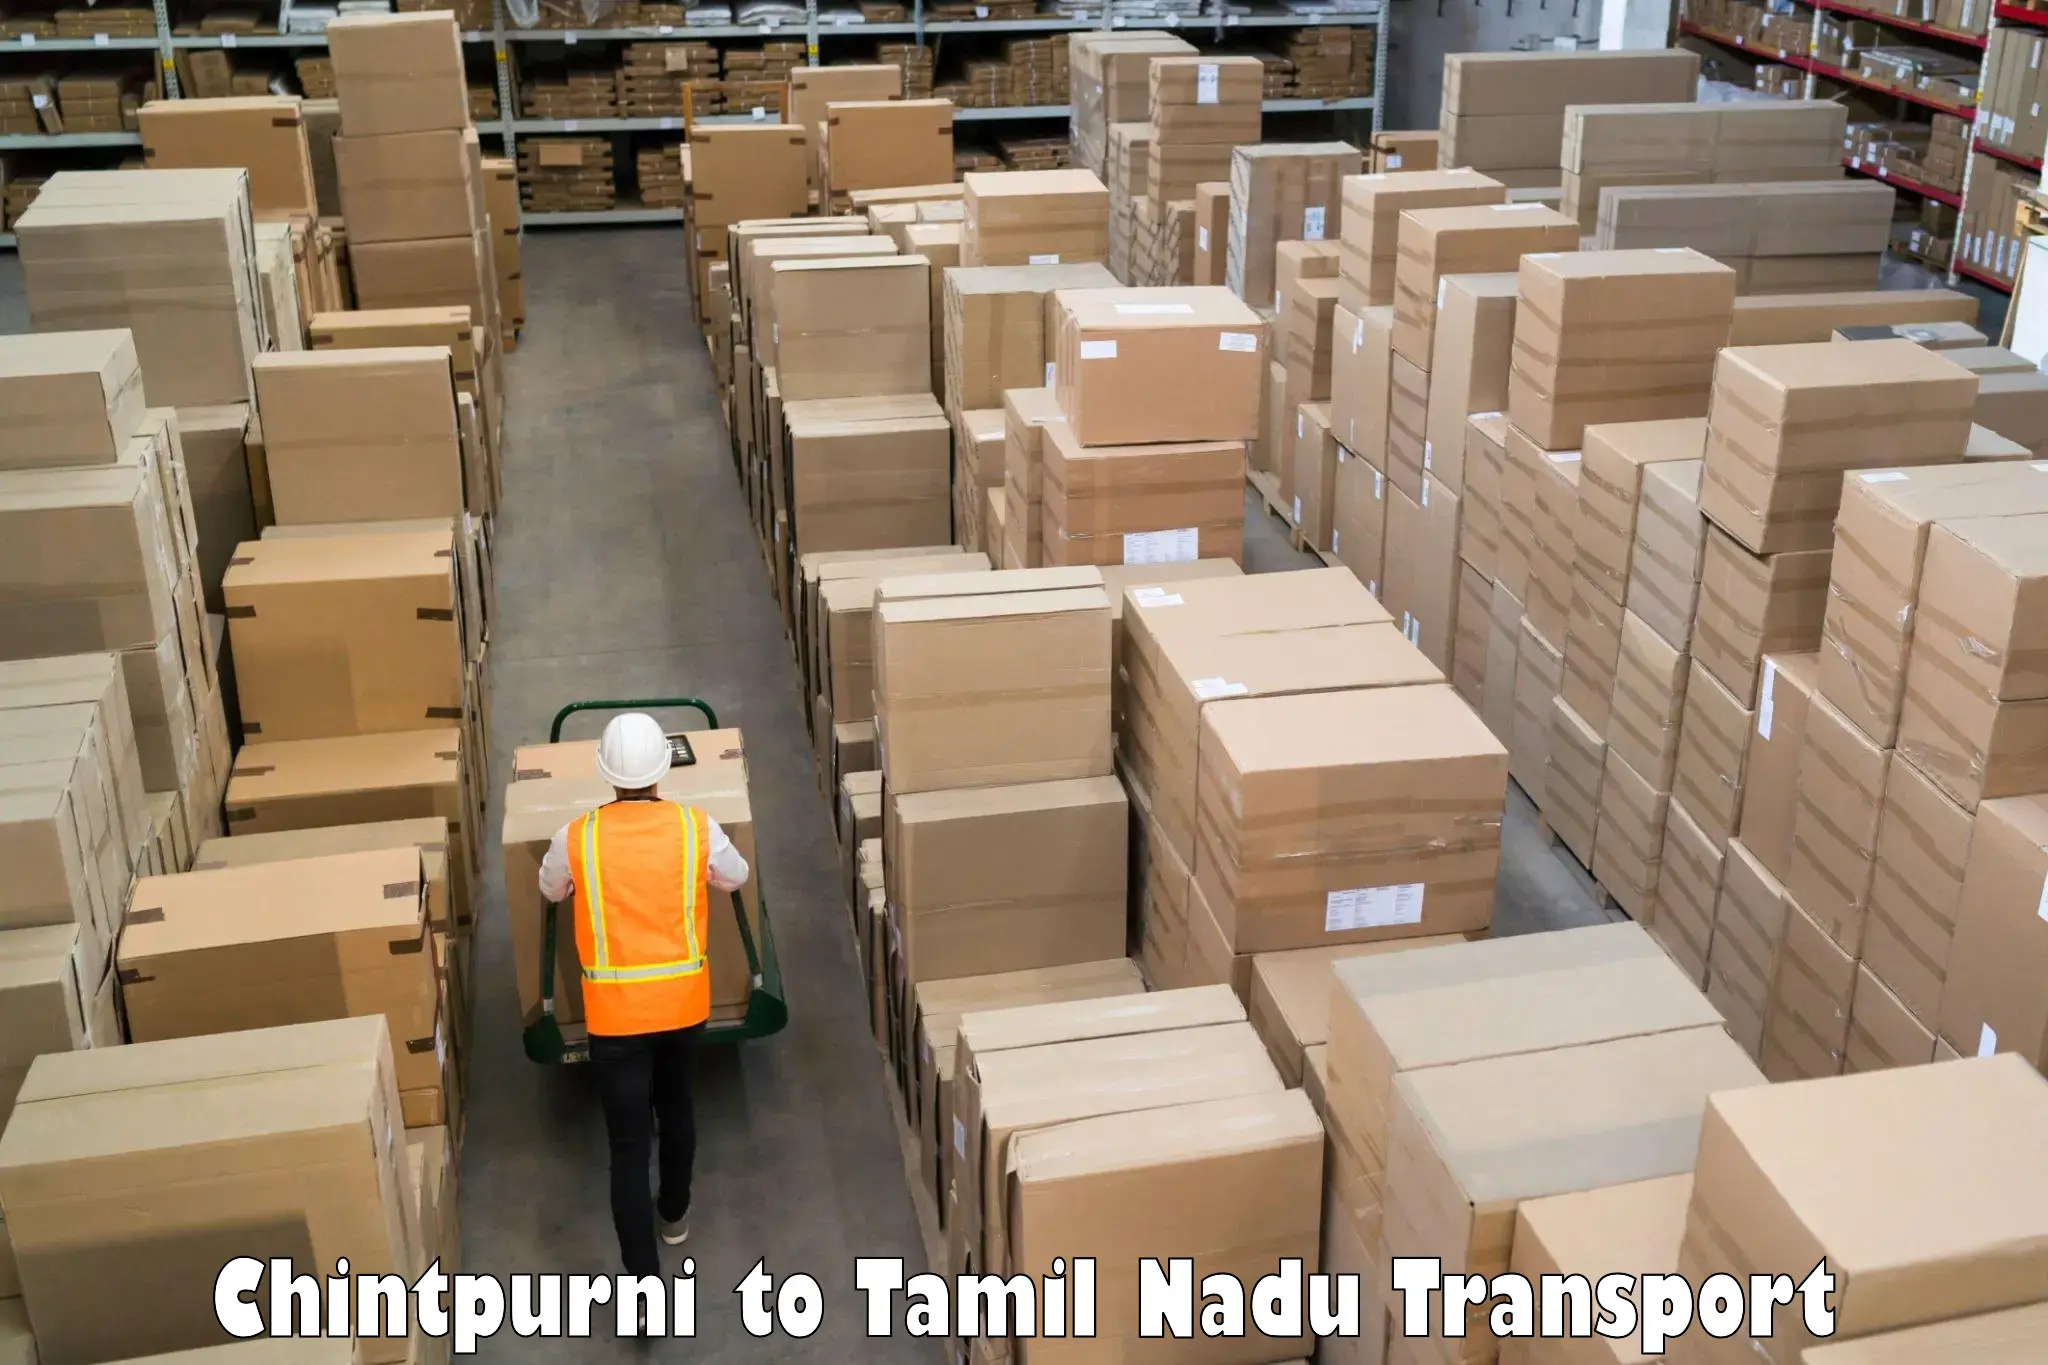 Goods transport services Chintpurni to Omalur